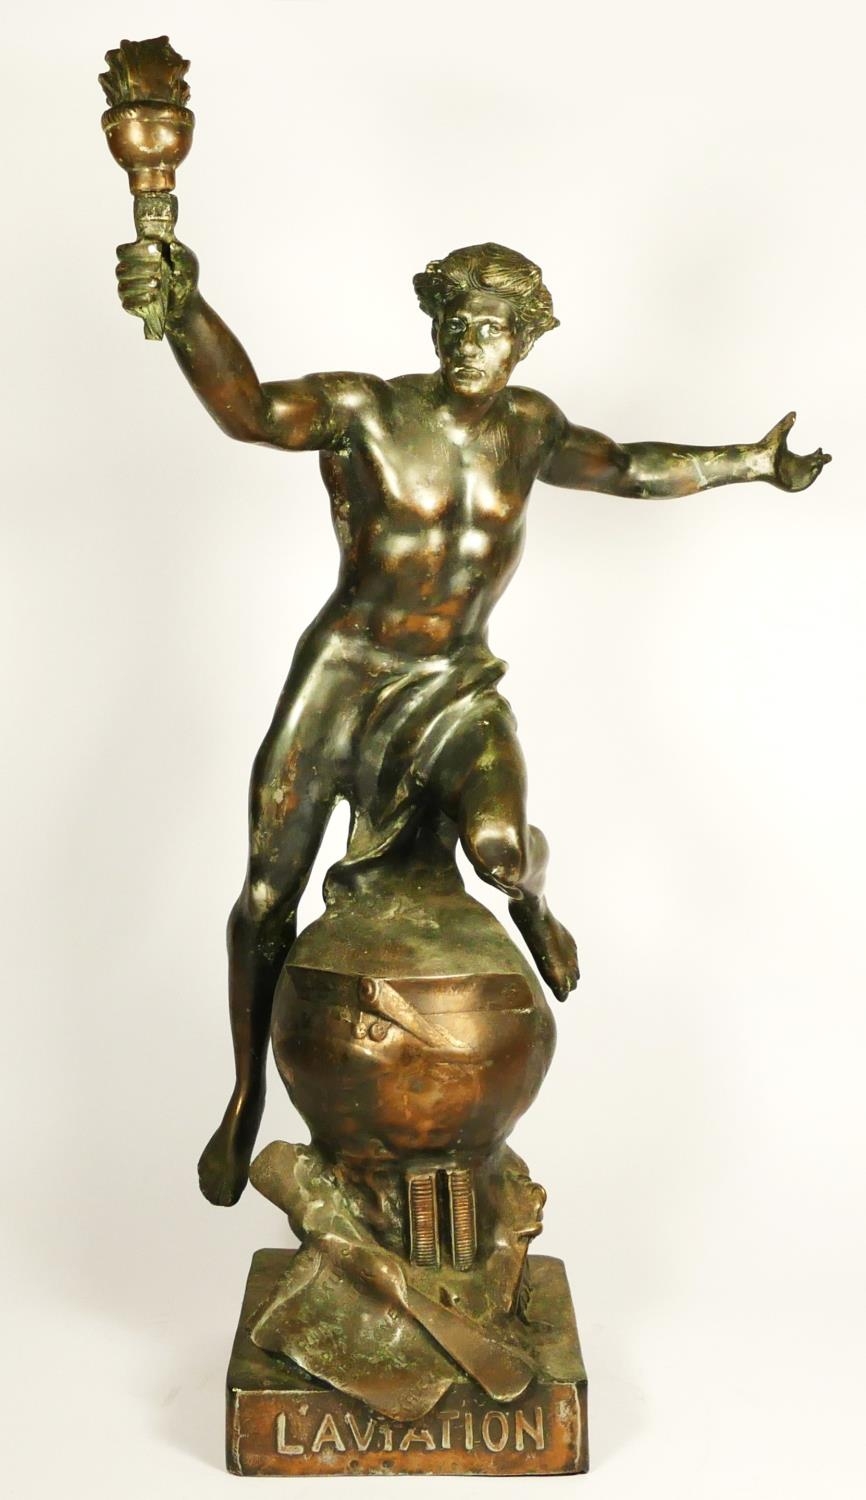 L'Aviation, an early 20th century bronzed spelter trophy/statue, depicting a youth holding a flaming